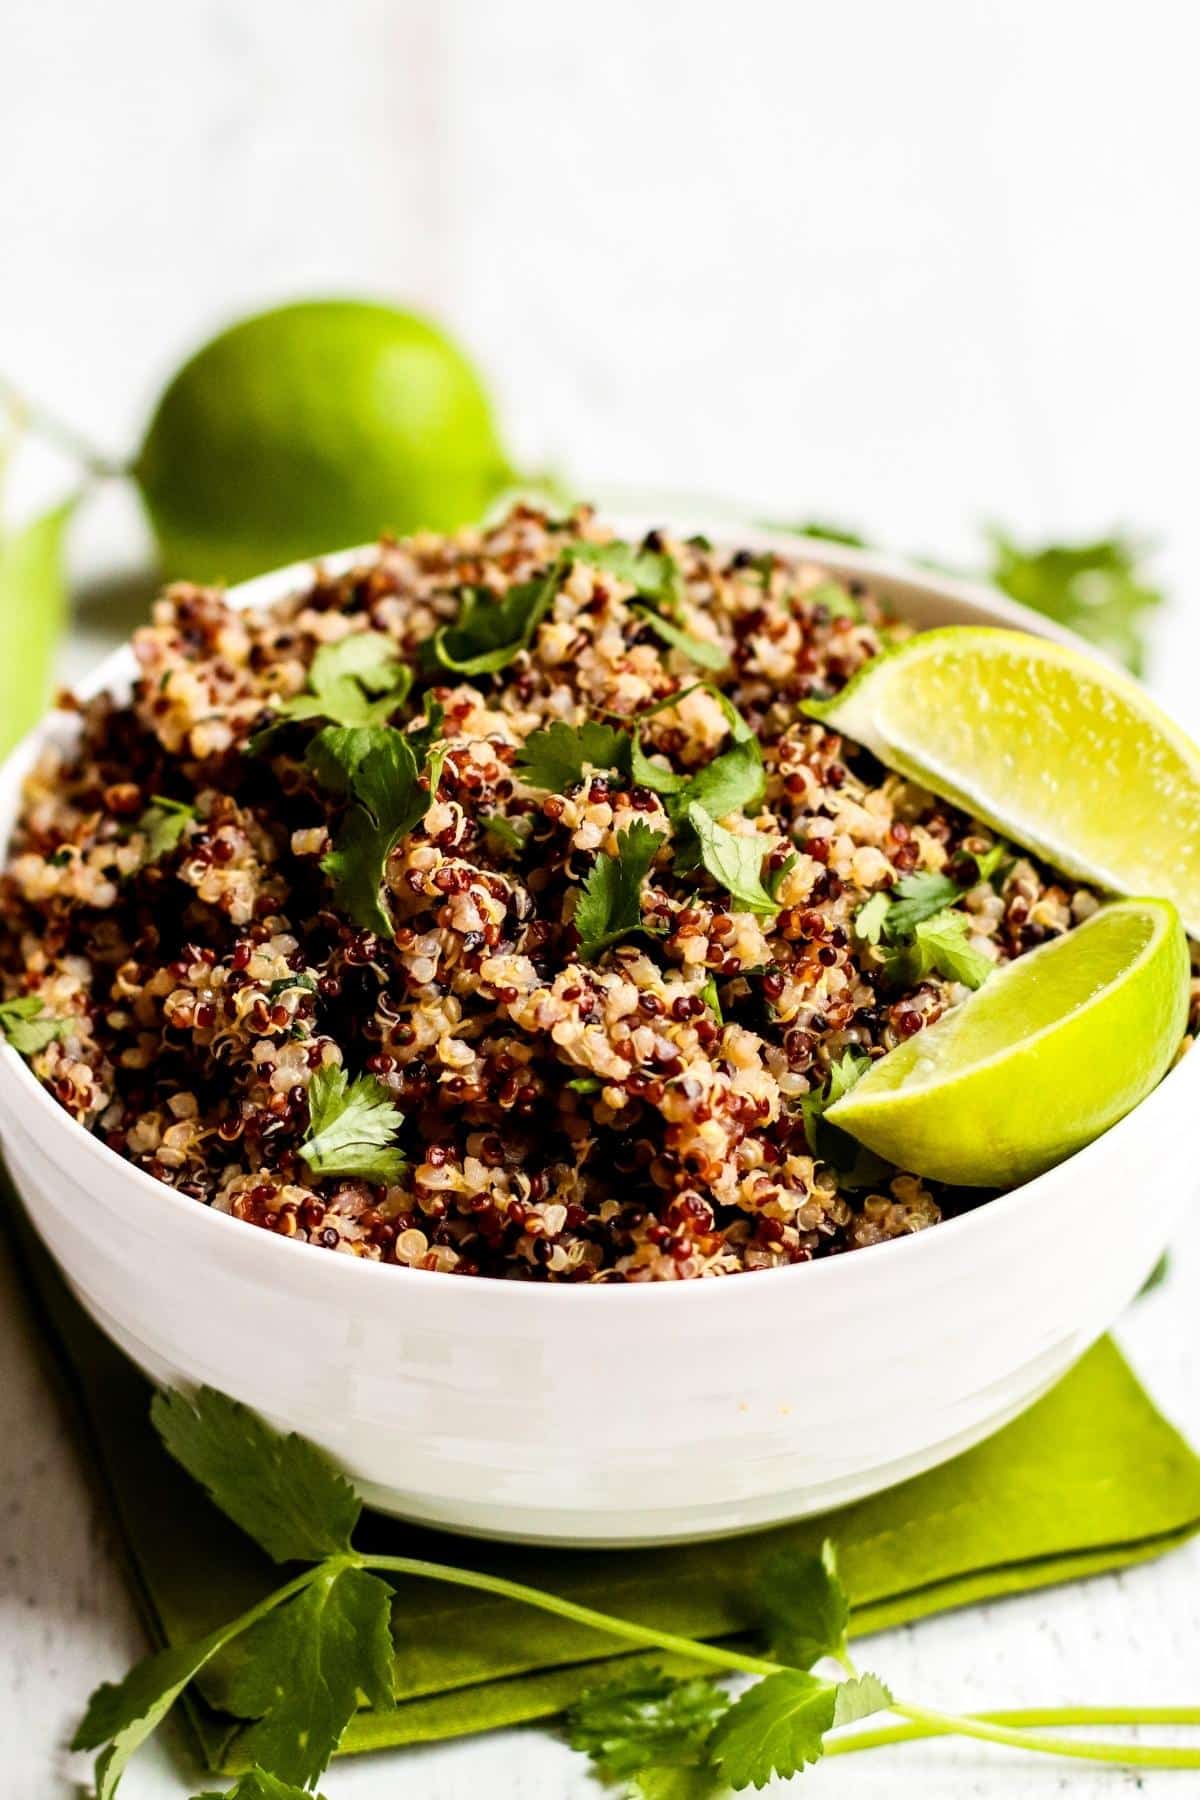 Cooked quinoa in a serving bowl garnished with fresh cilantro and lime wedges.